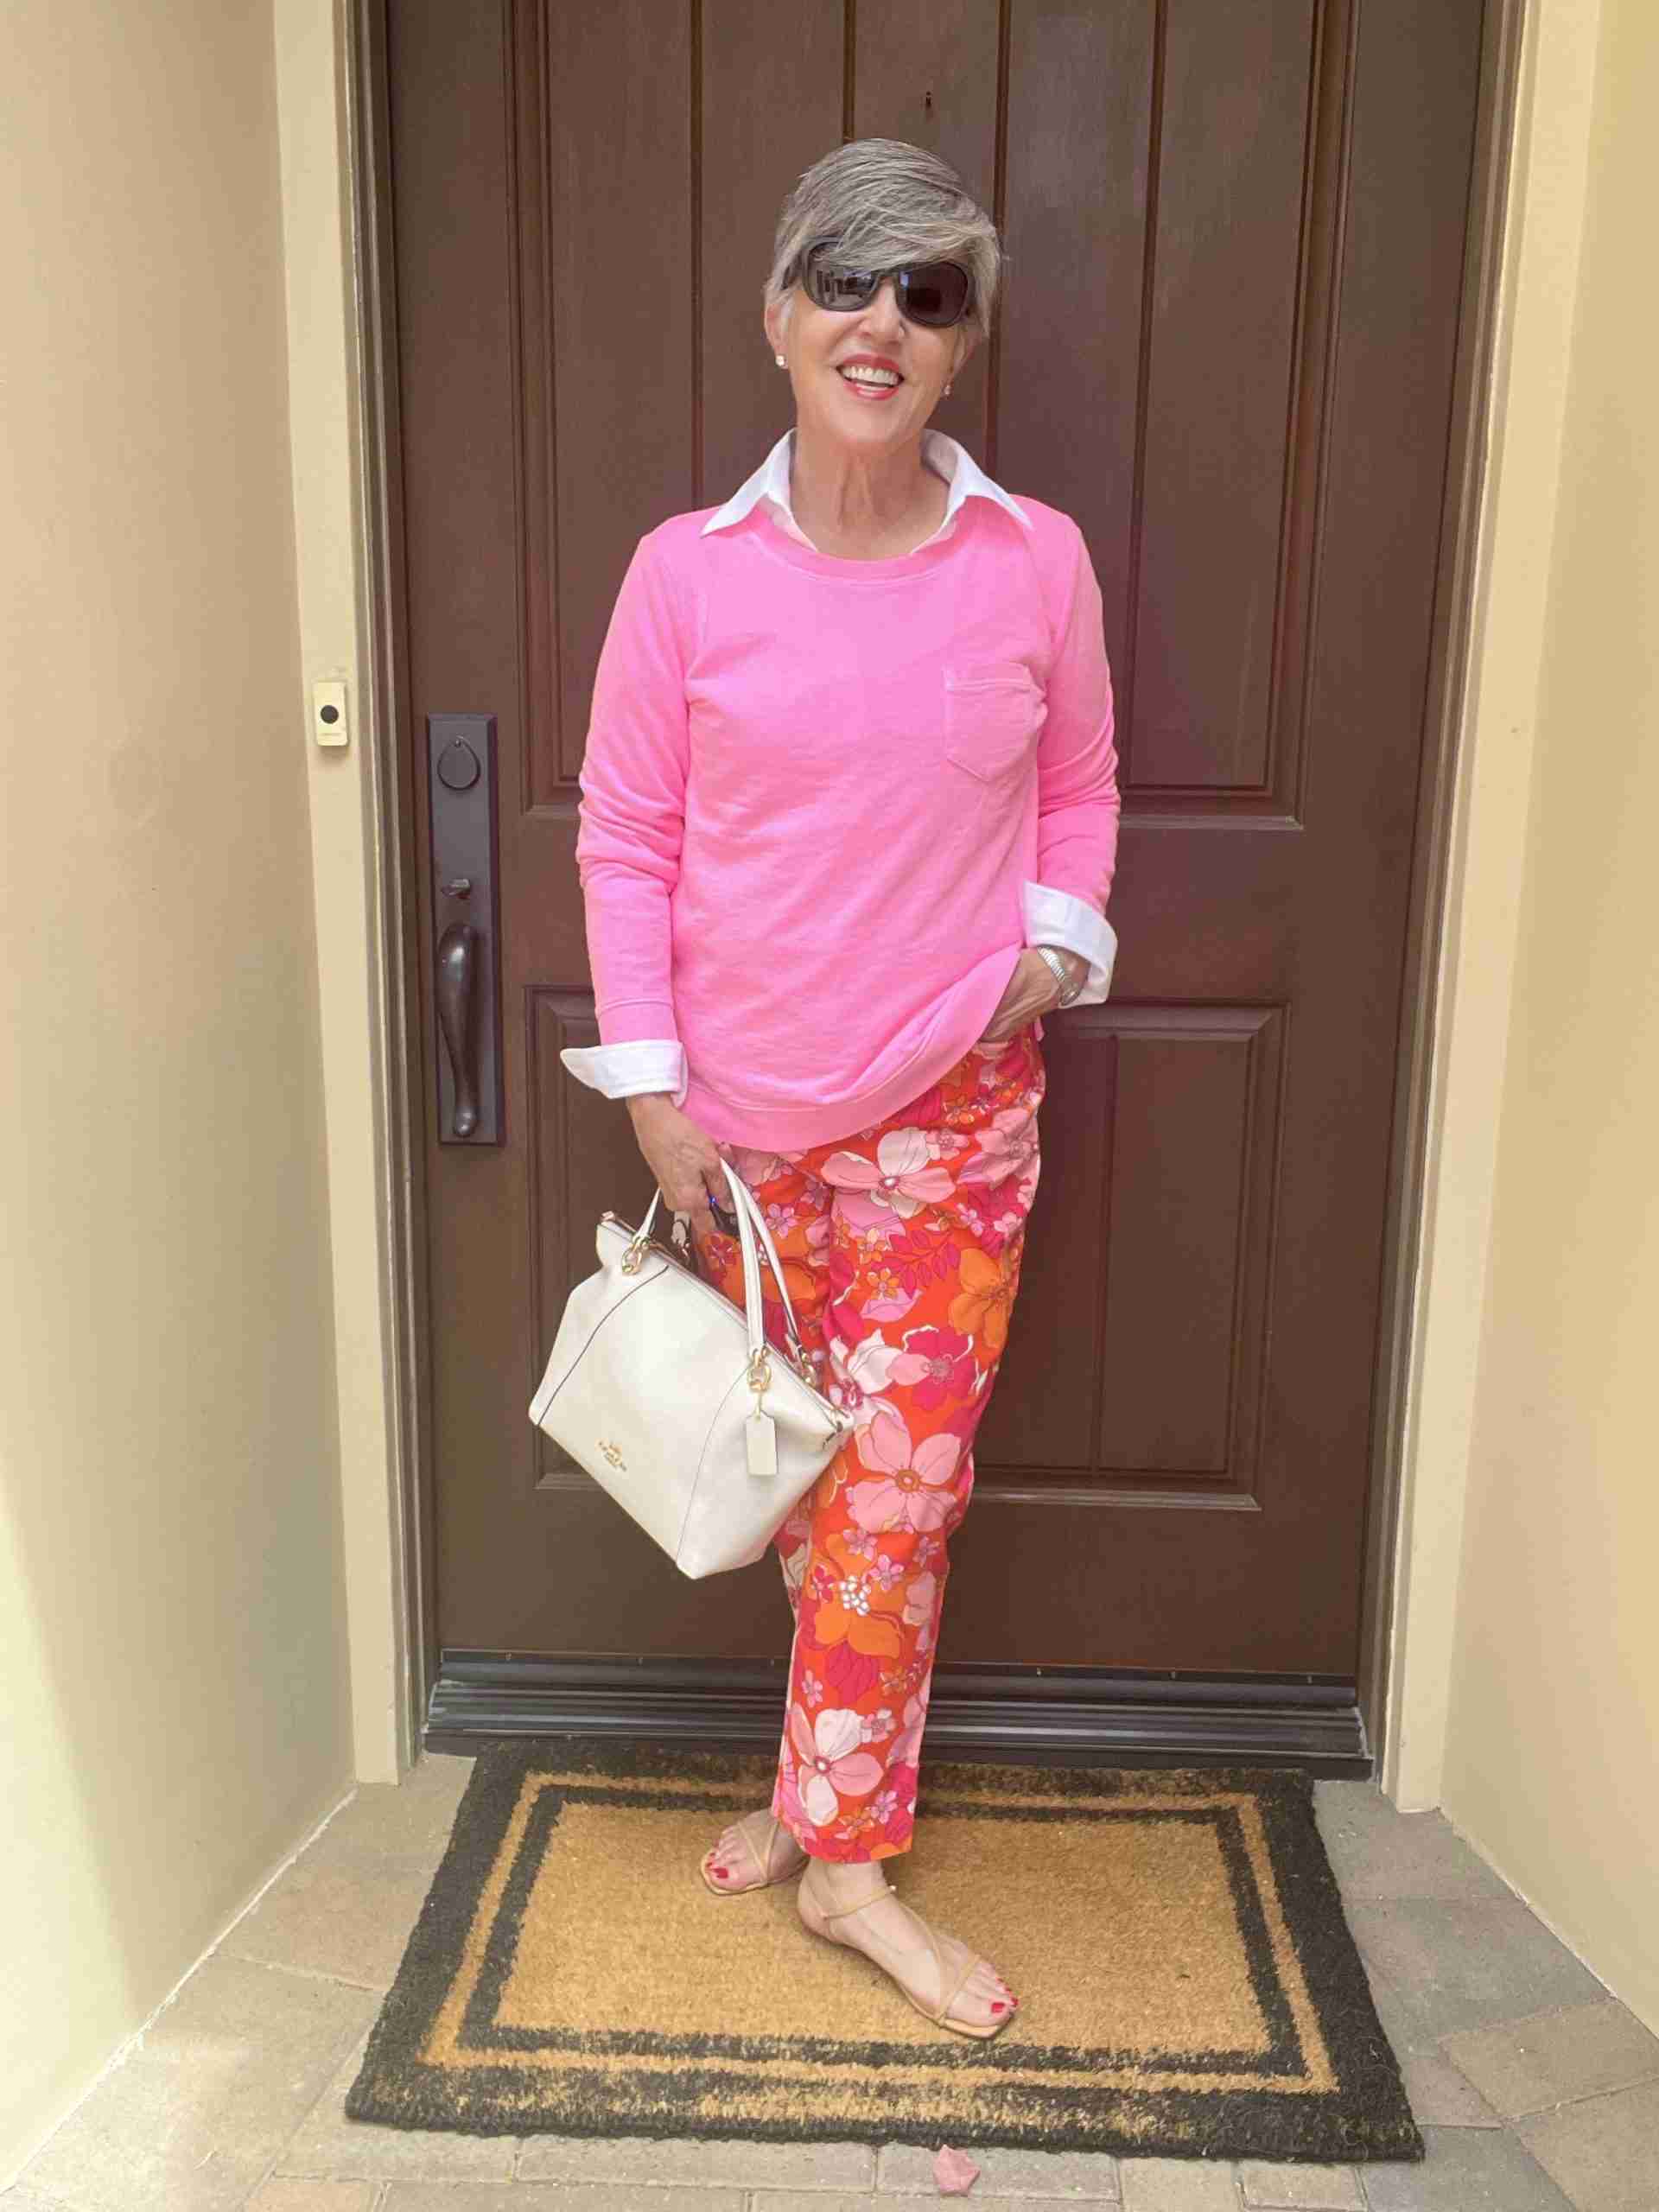 In this fun look, I am wearing the colorful crop pants with a bright pink sweatshirt over a white shirt.  My bag is the same white tote as above and I am wearing nude sandals.